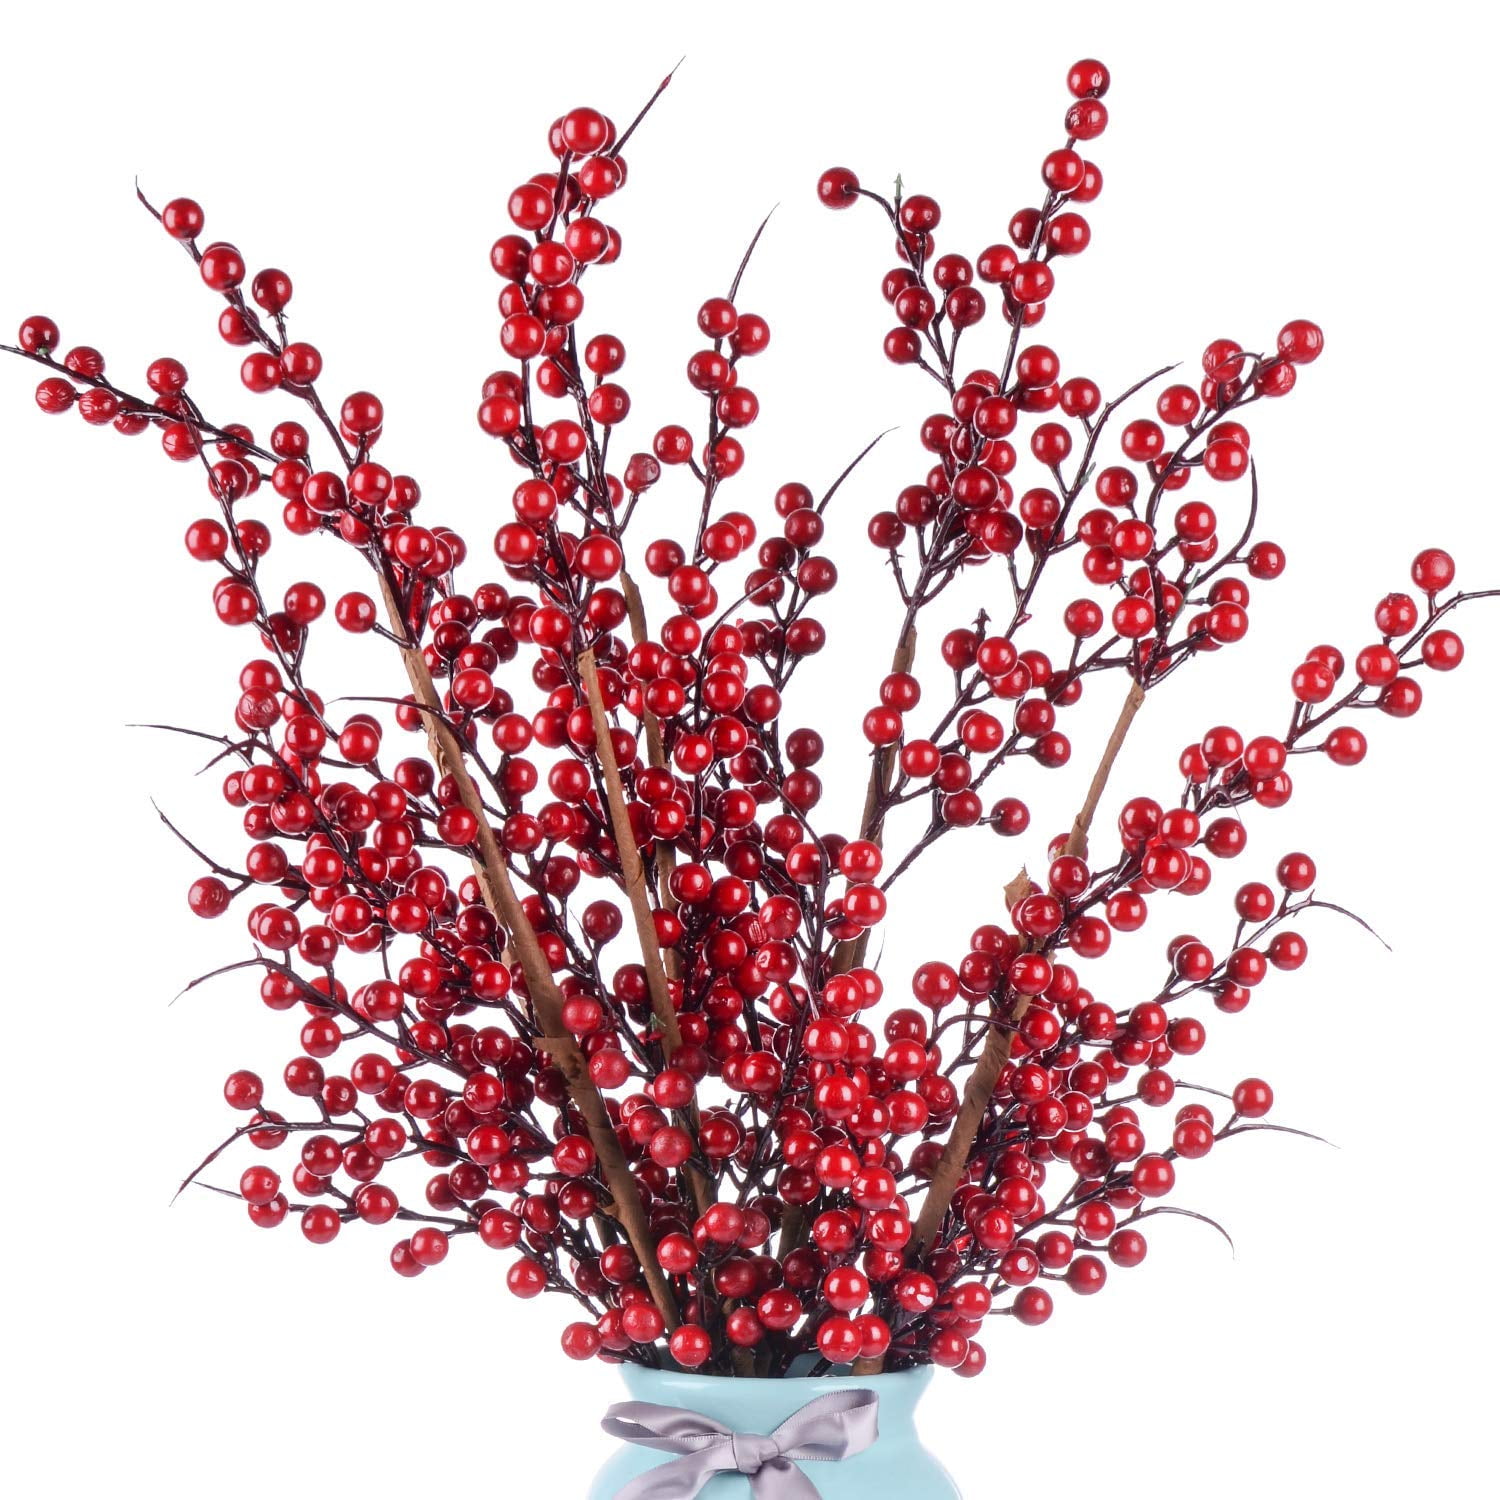 EXCEART 6pcs Artificial Red Berry Stems Red Berry Picks Holly Berries Branches Christmas Red Berry Picks for Christmas Tree Ornaments Xmas Wreath Decoration